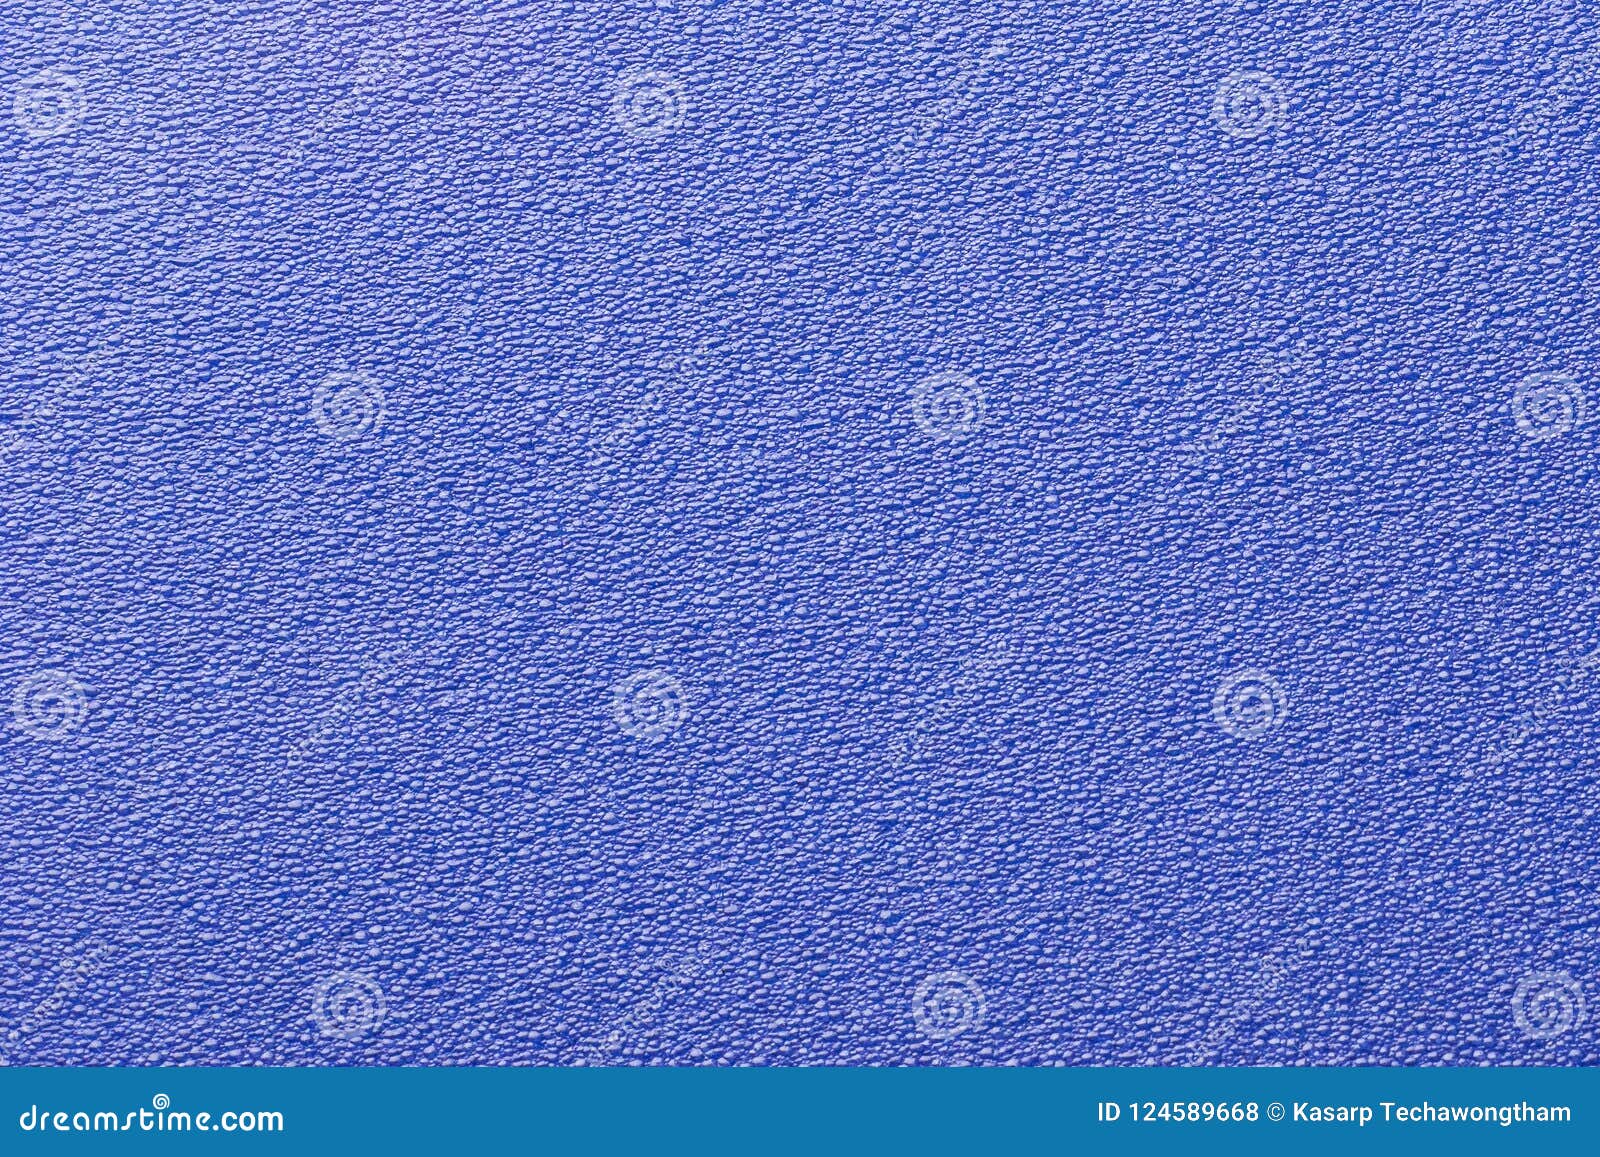 Texture of Studio Soundproof Foam or Solid Foams Stock Photo - Image of ...